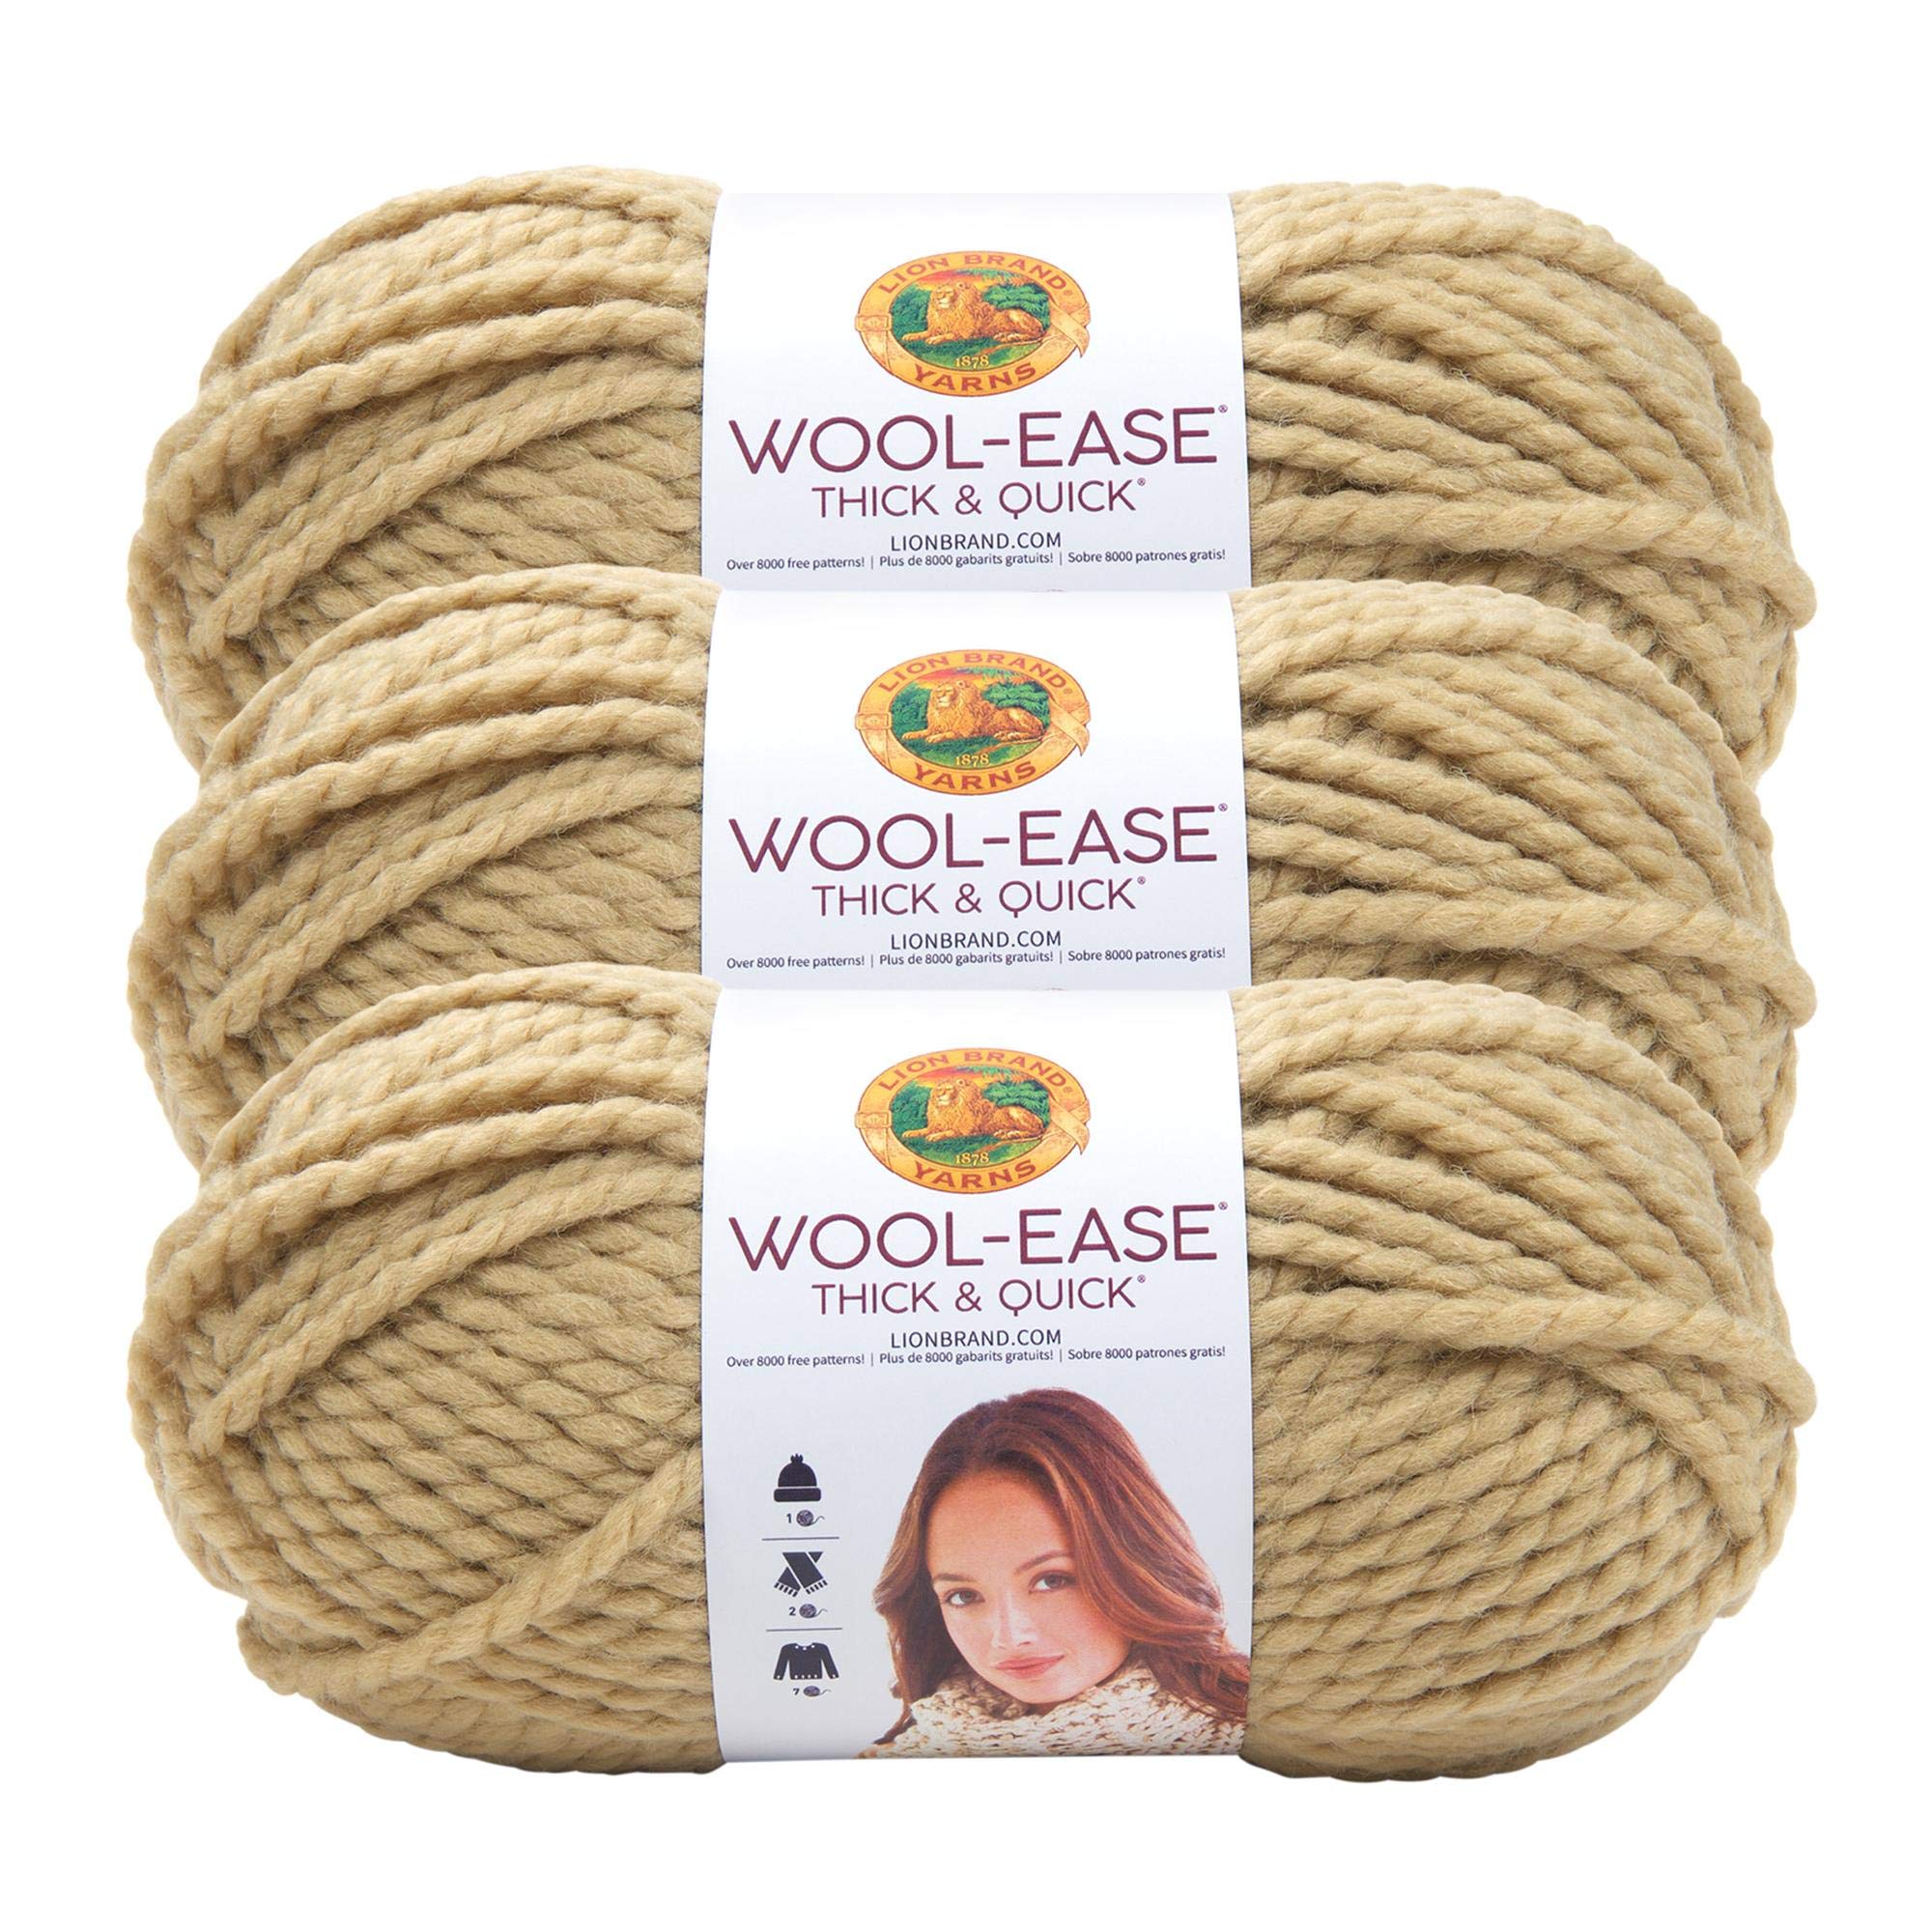 Lion Brand Yarn Wool-Ease Thick & Quick Yarn, Soft And Bulky Yarn For Knitting, Crocheting, And Crafting, 3 Pack, Peanut